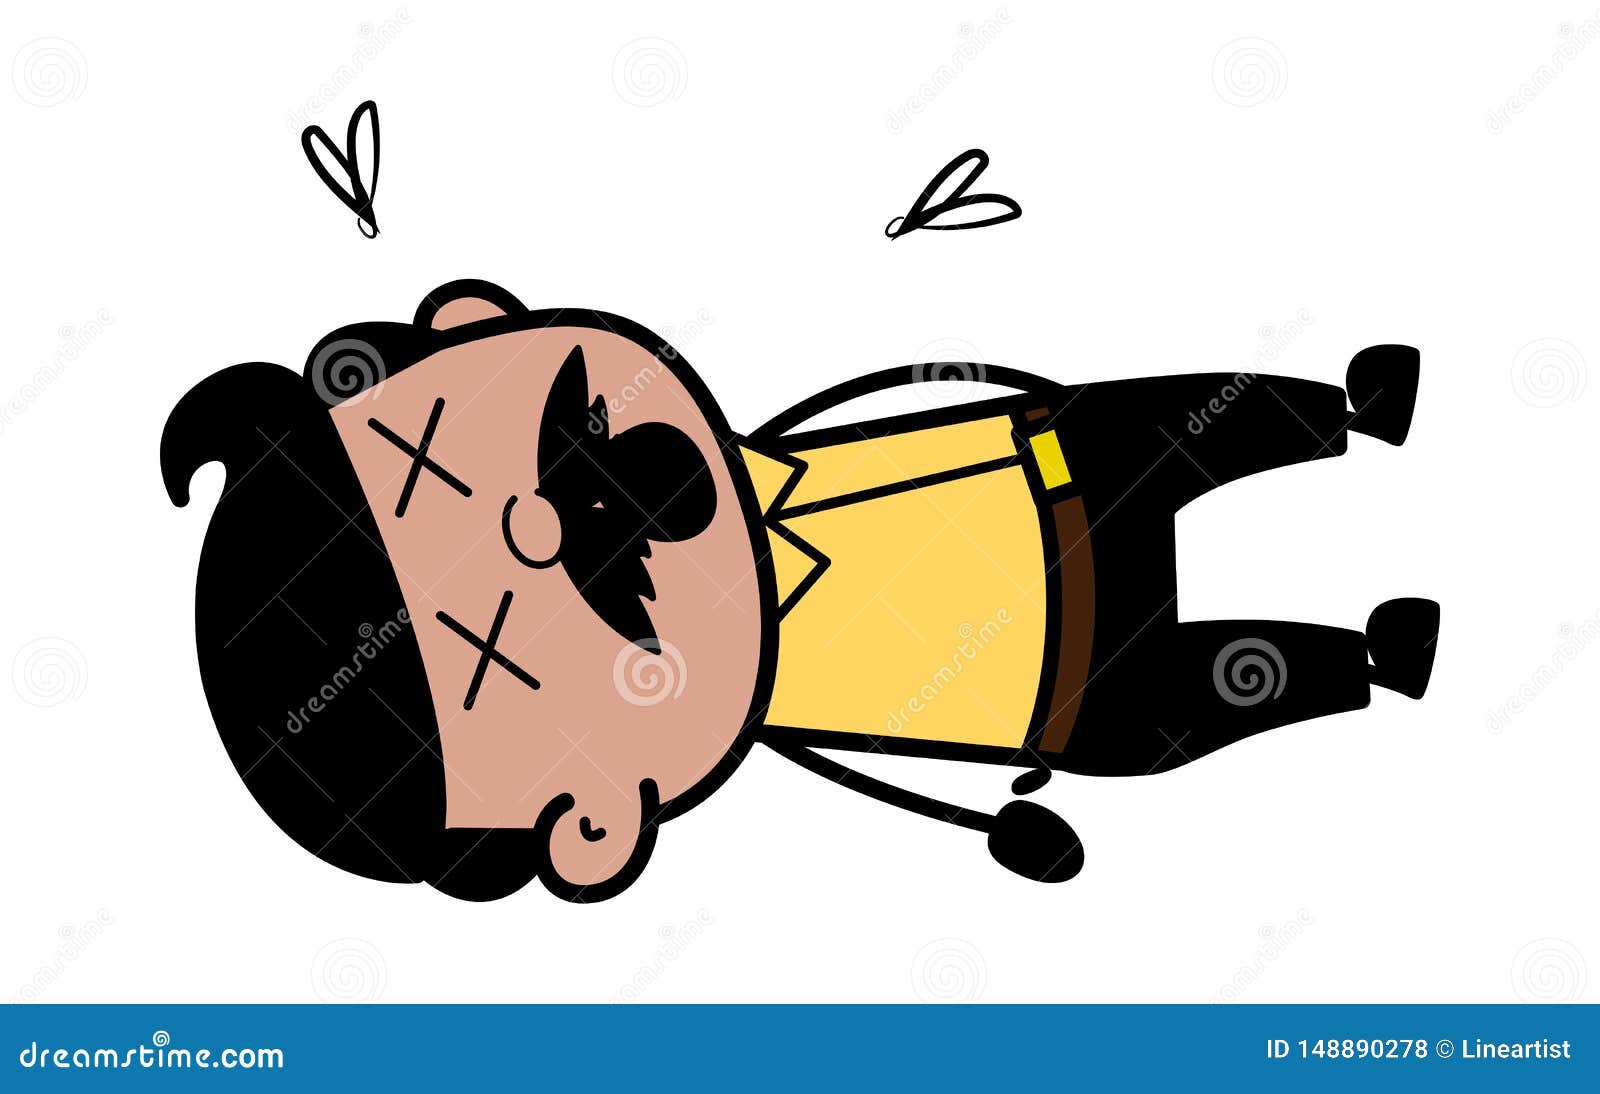 Dead Body - Indian Cartoon Man Father Vector Illustration Stock  Illustration - Illustration of businessman, accident: 148890278